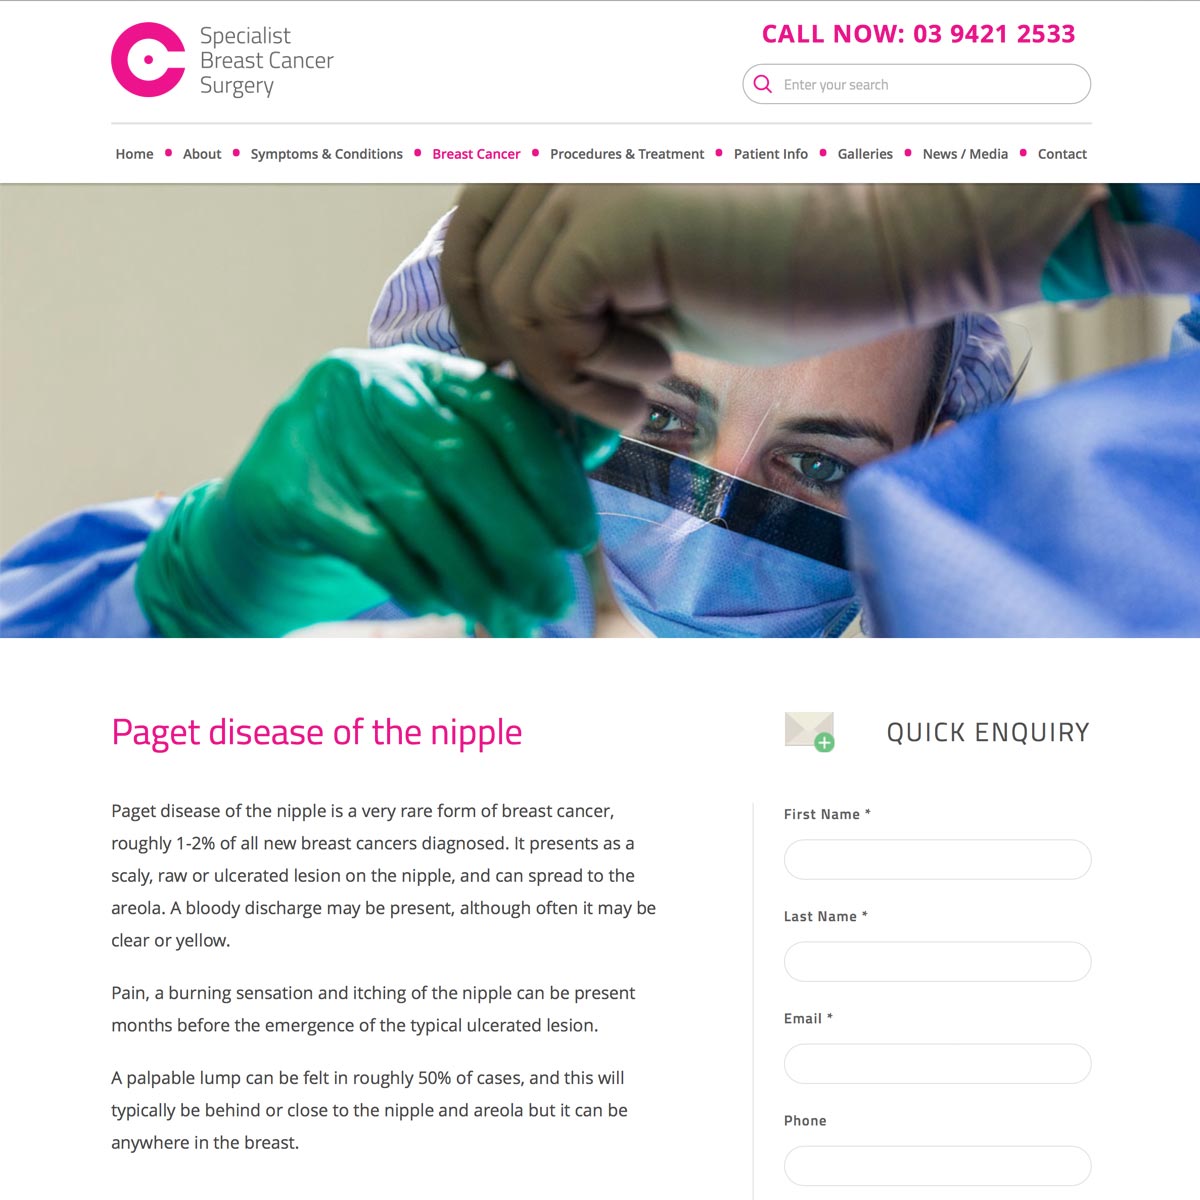 Breast Cancer Specialist - Pagets Disease